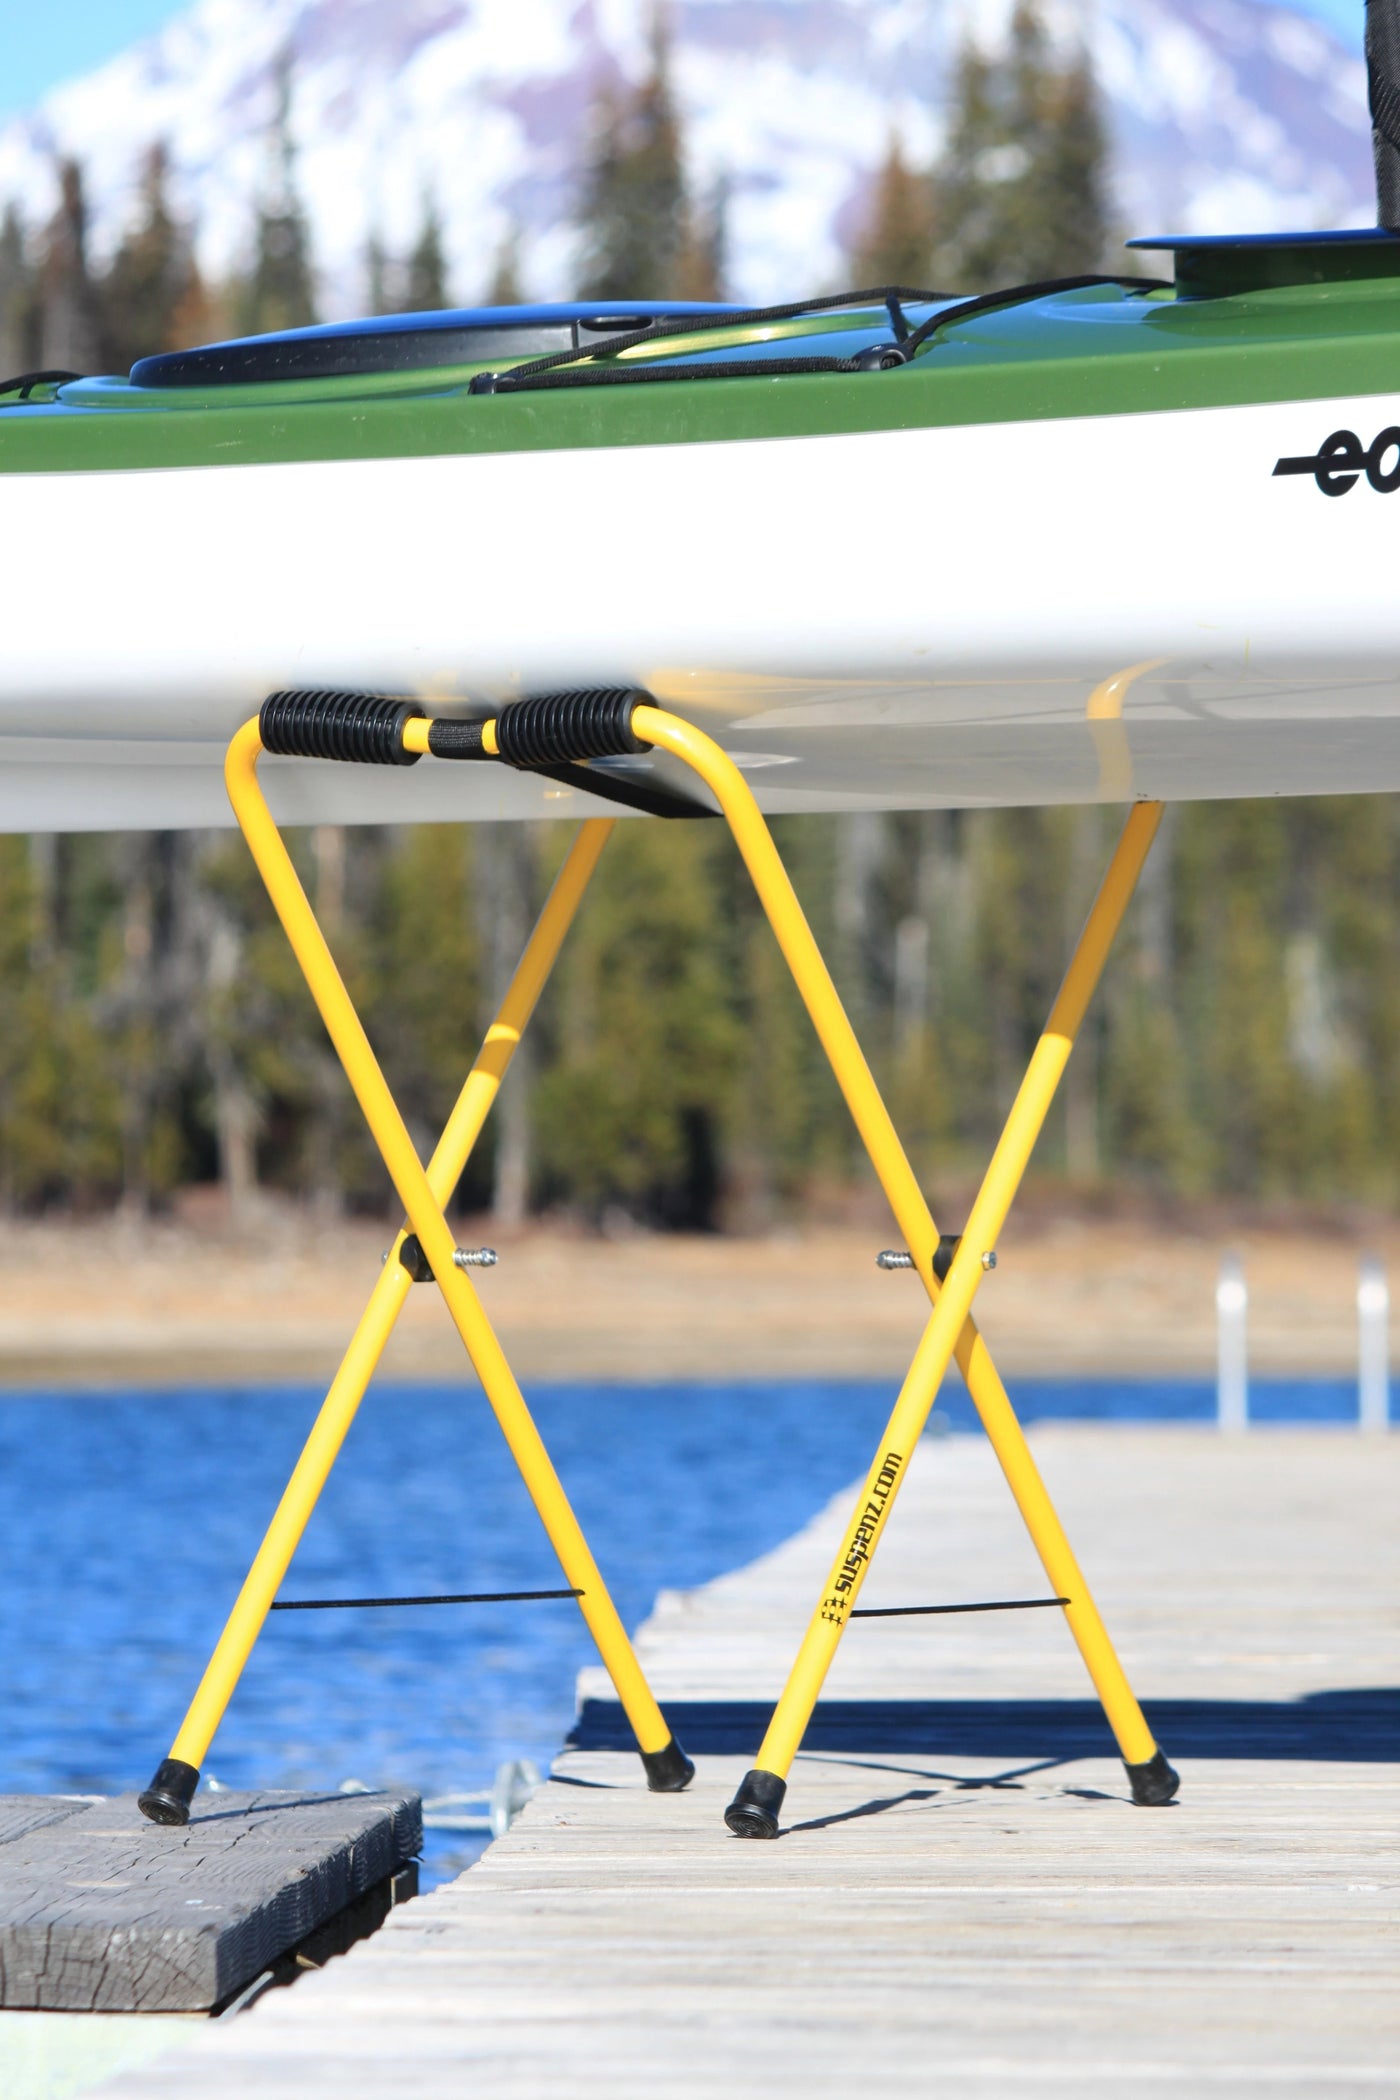 Universal Portable Boat Stands - FINAL SALE